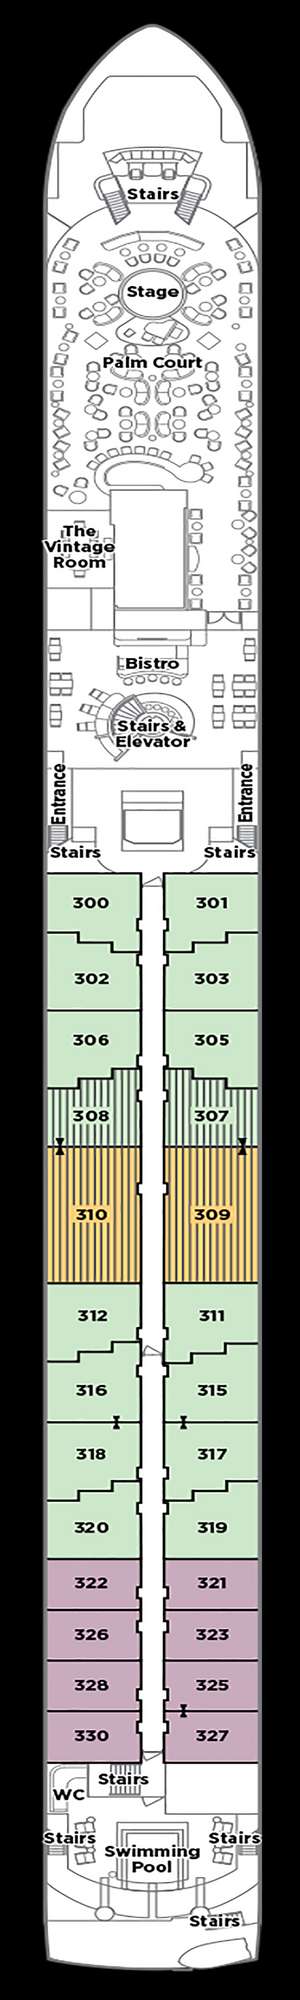 Deck plan for Crystal Bach